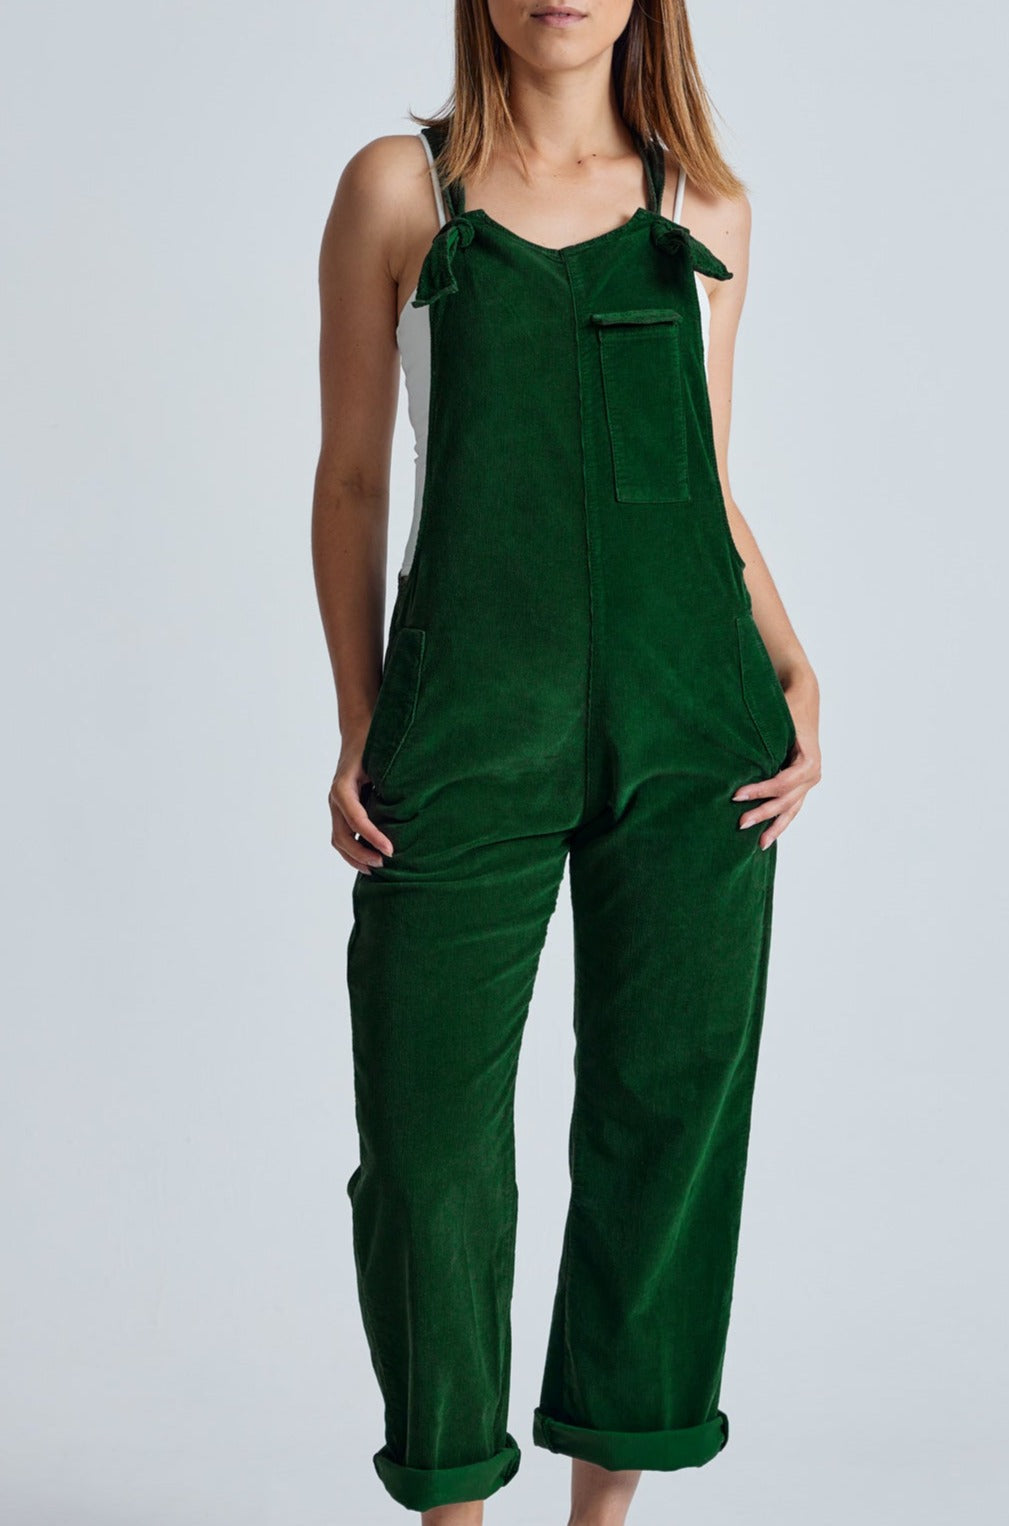 MARY-LOU Green - GOTS Organic Cotton Cord Dungarees by Flax & Loom, M